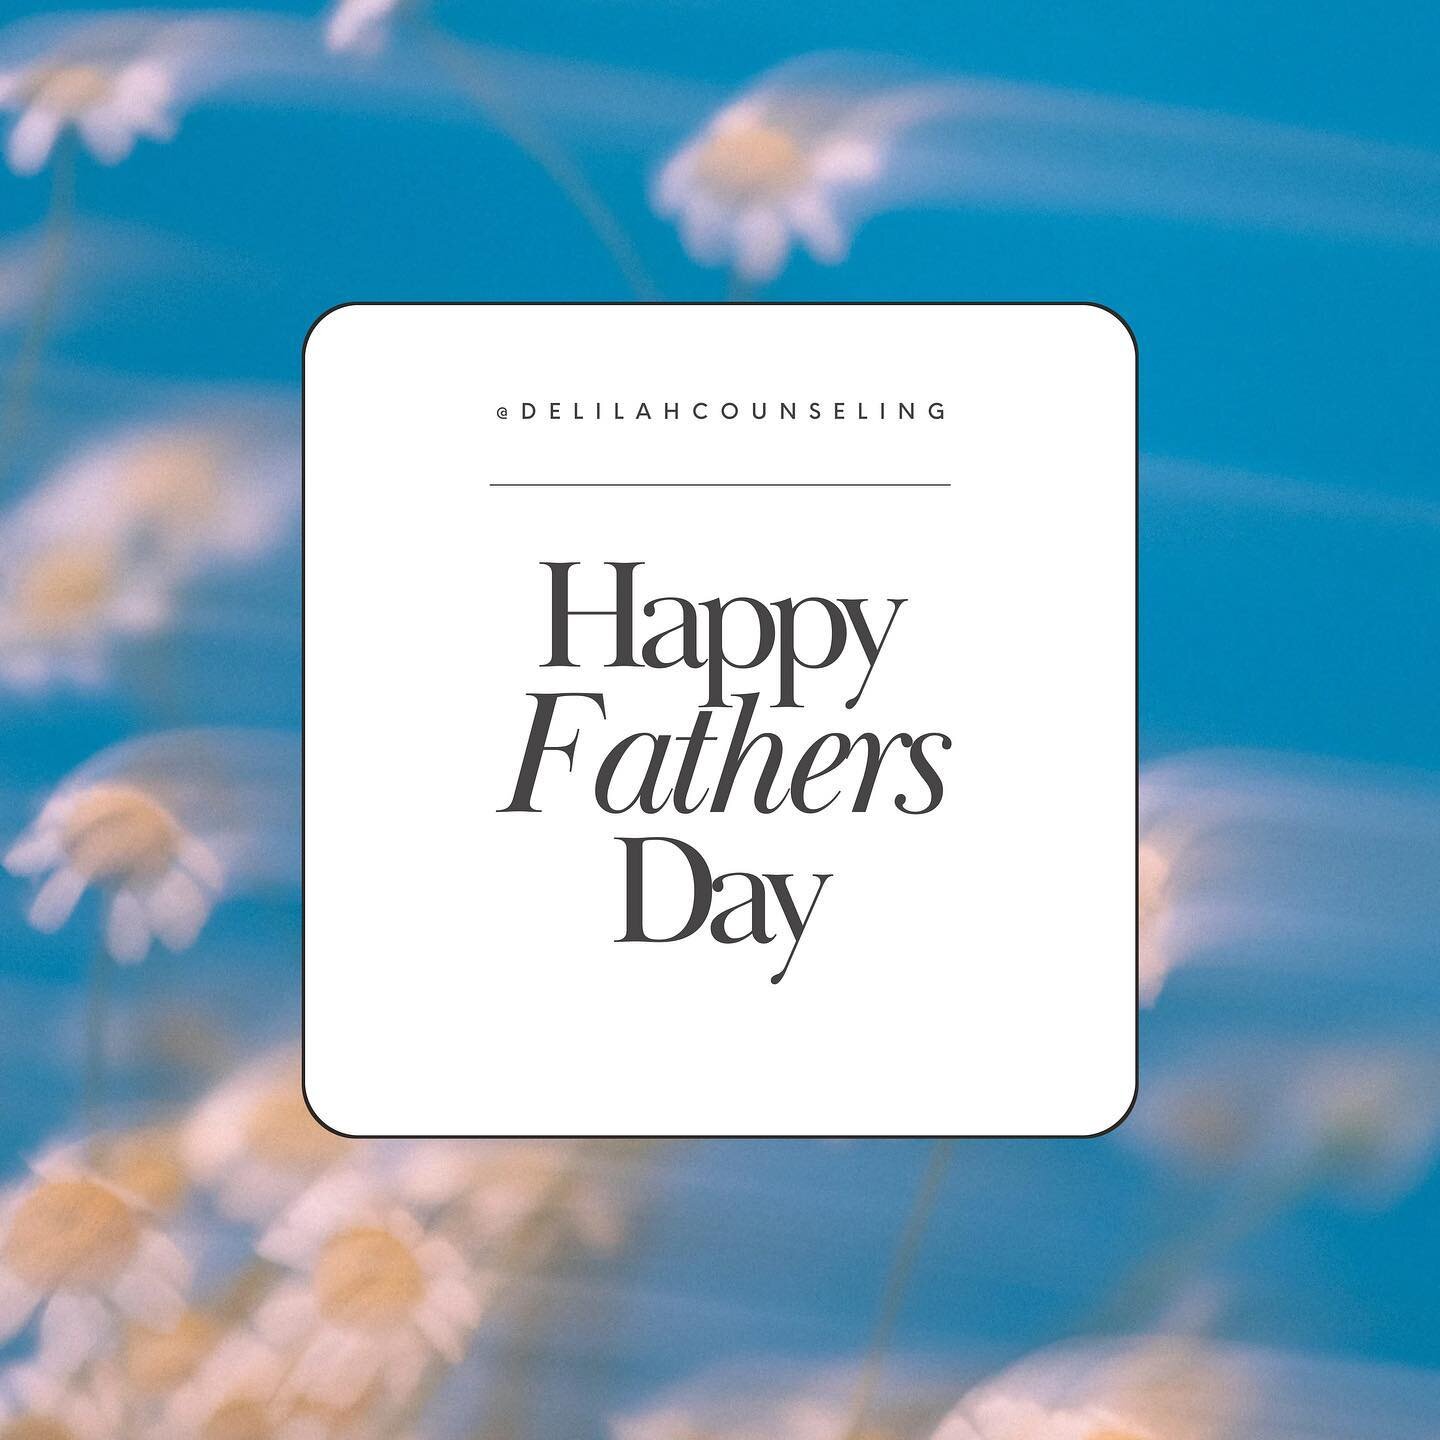 happy father&rsquo;s day to all of the dads who work to support, inspire, and lift up the women and girls in their lives. we are so grateful for your love and encouragement 🦋 

#womenempowerment #happyfathersday #therapy #dads #nashville #therapy #n